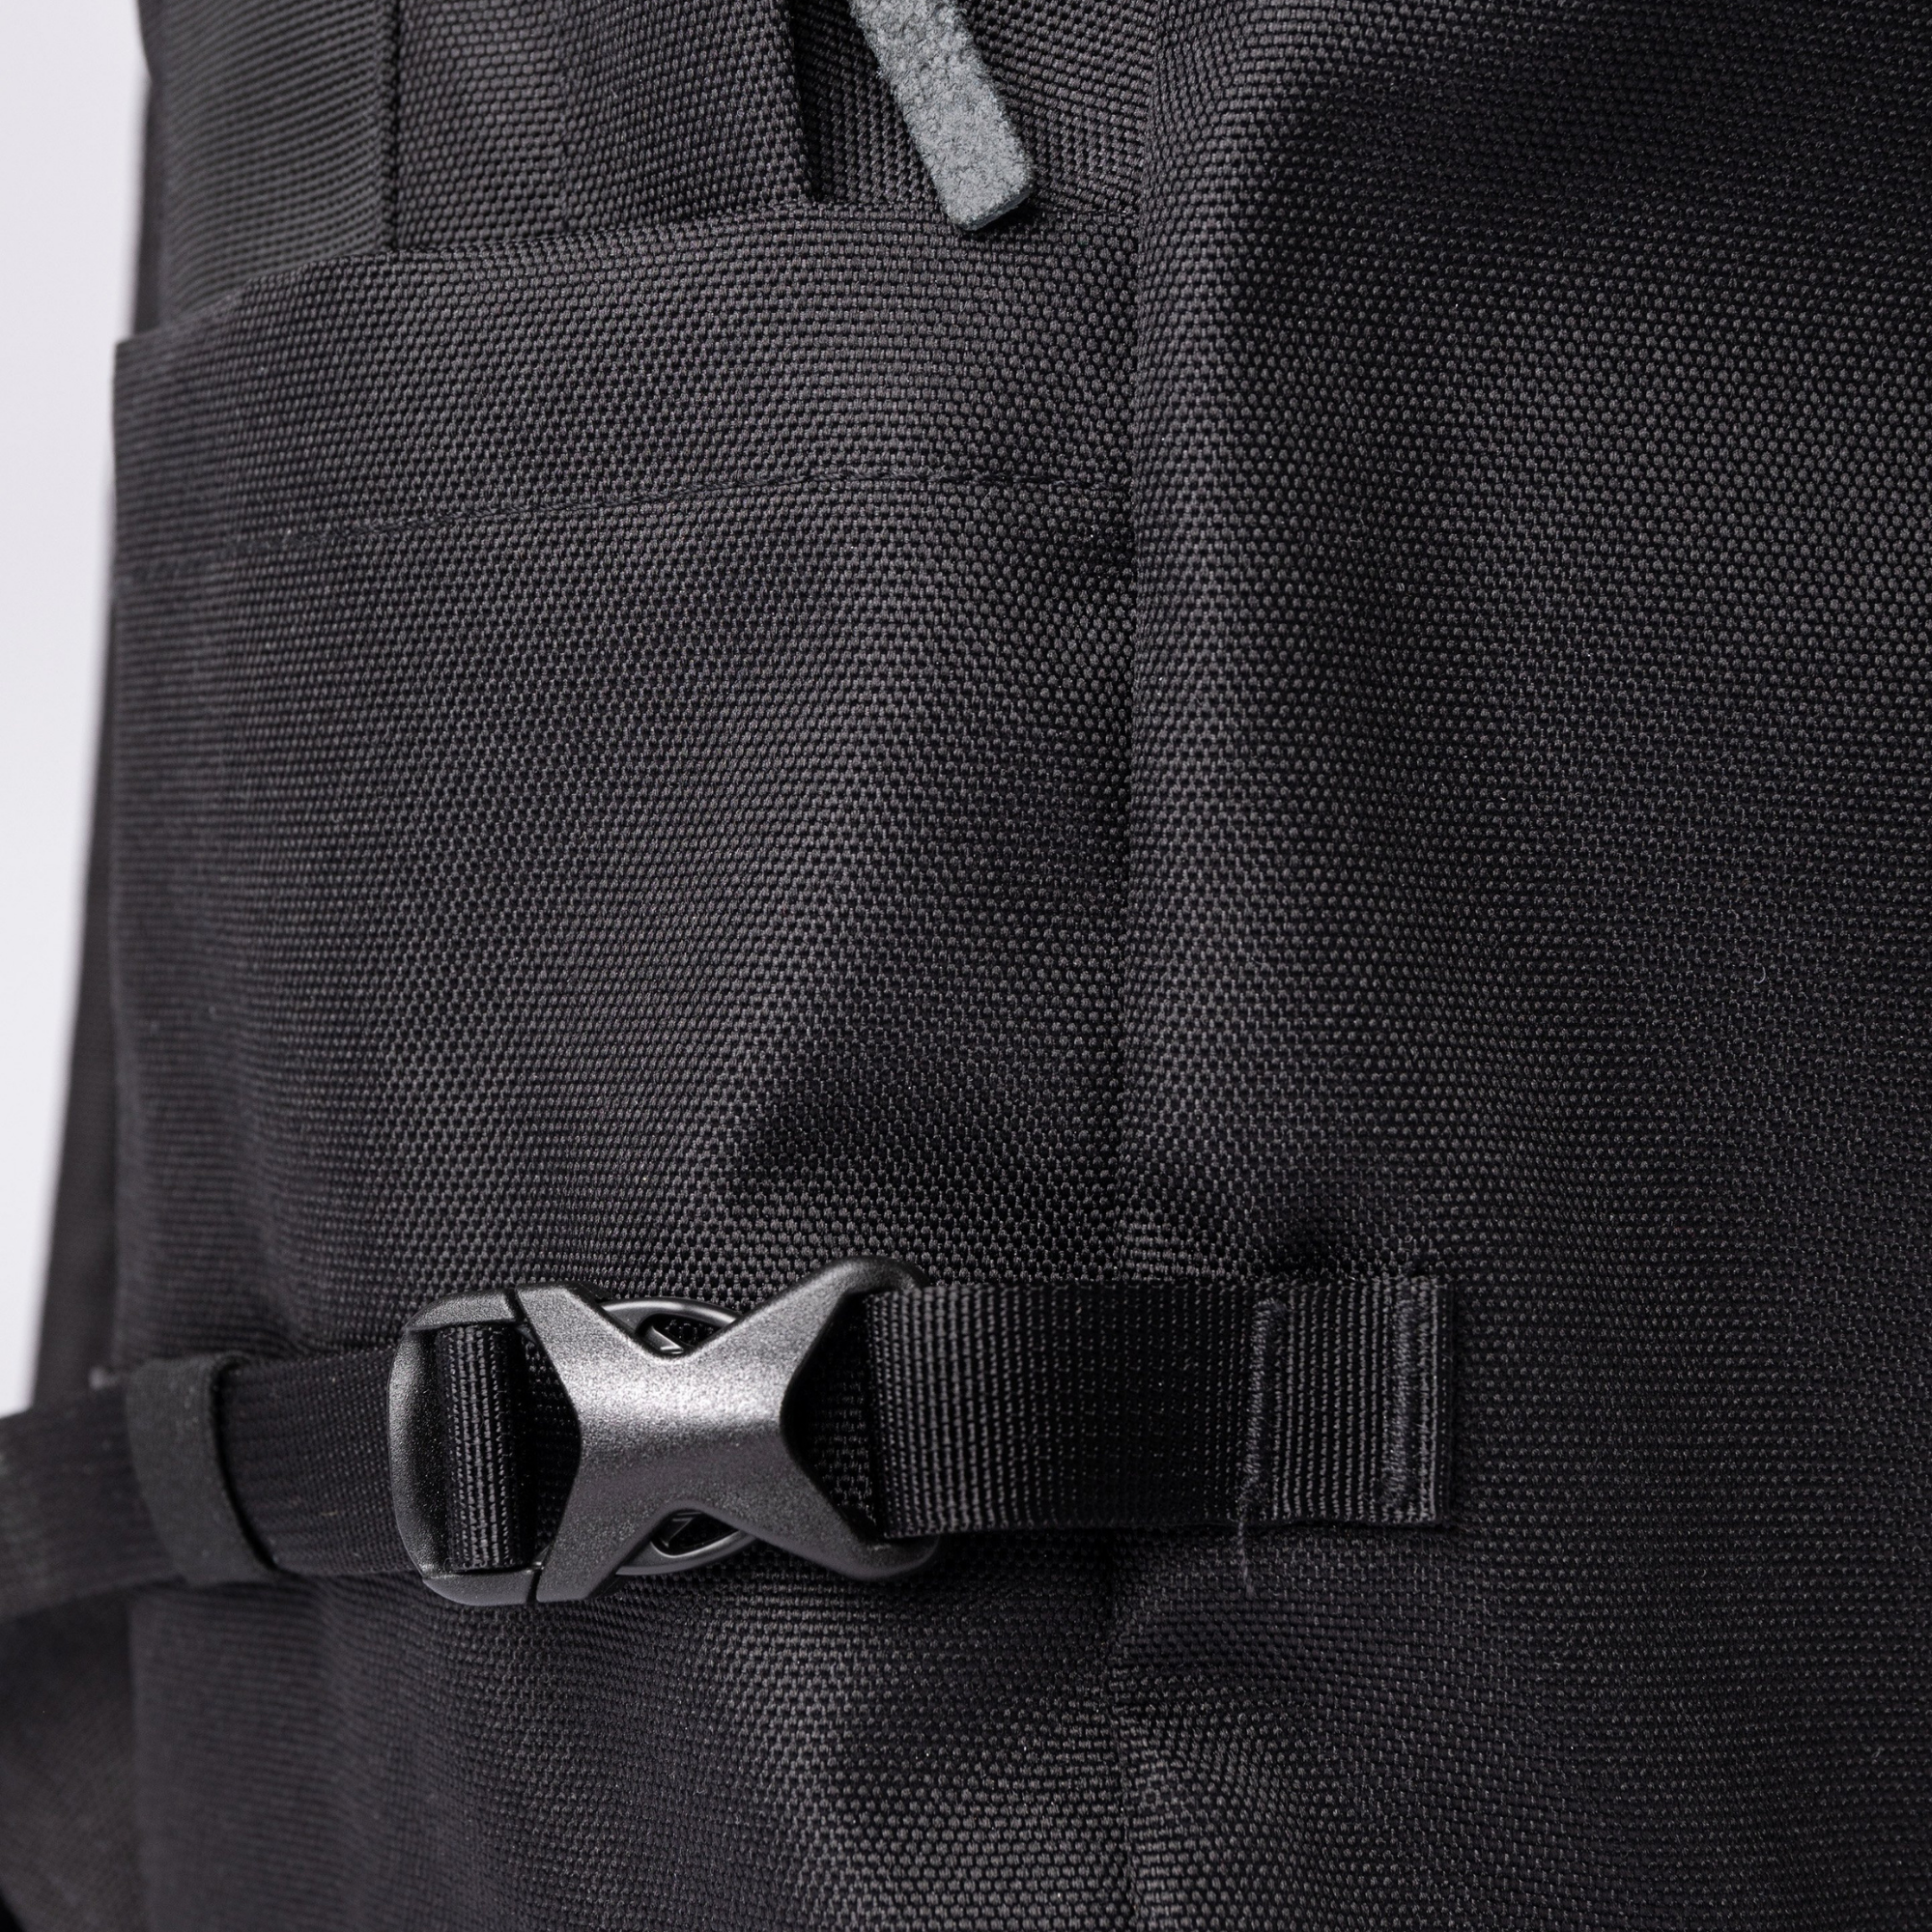 Sandqvist Andre Backpack in Black SQA2323| Shop from eightywingold an official brand partner for Sandqvist Canada and US. 